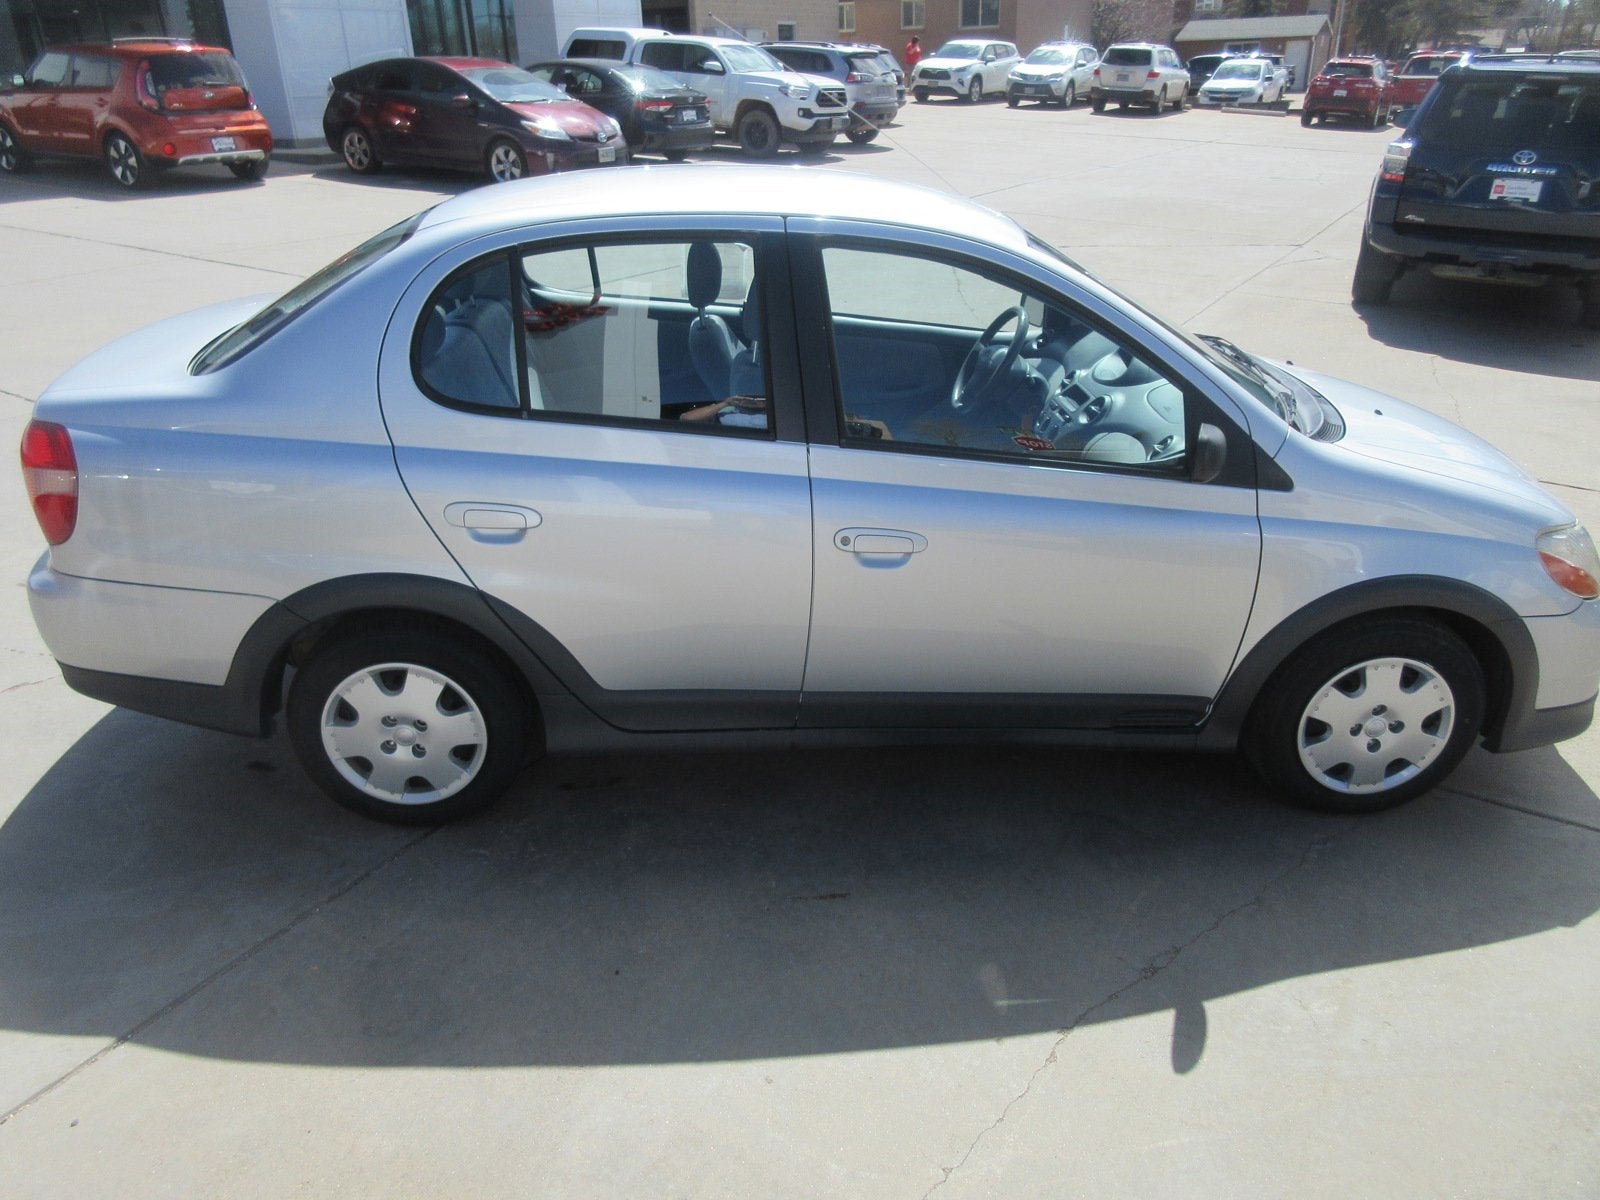 Used 2002 Toyota Echo  with VIN JTDBT123X20245744 for sale in Laramie, WY